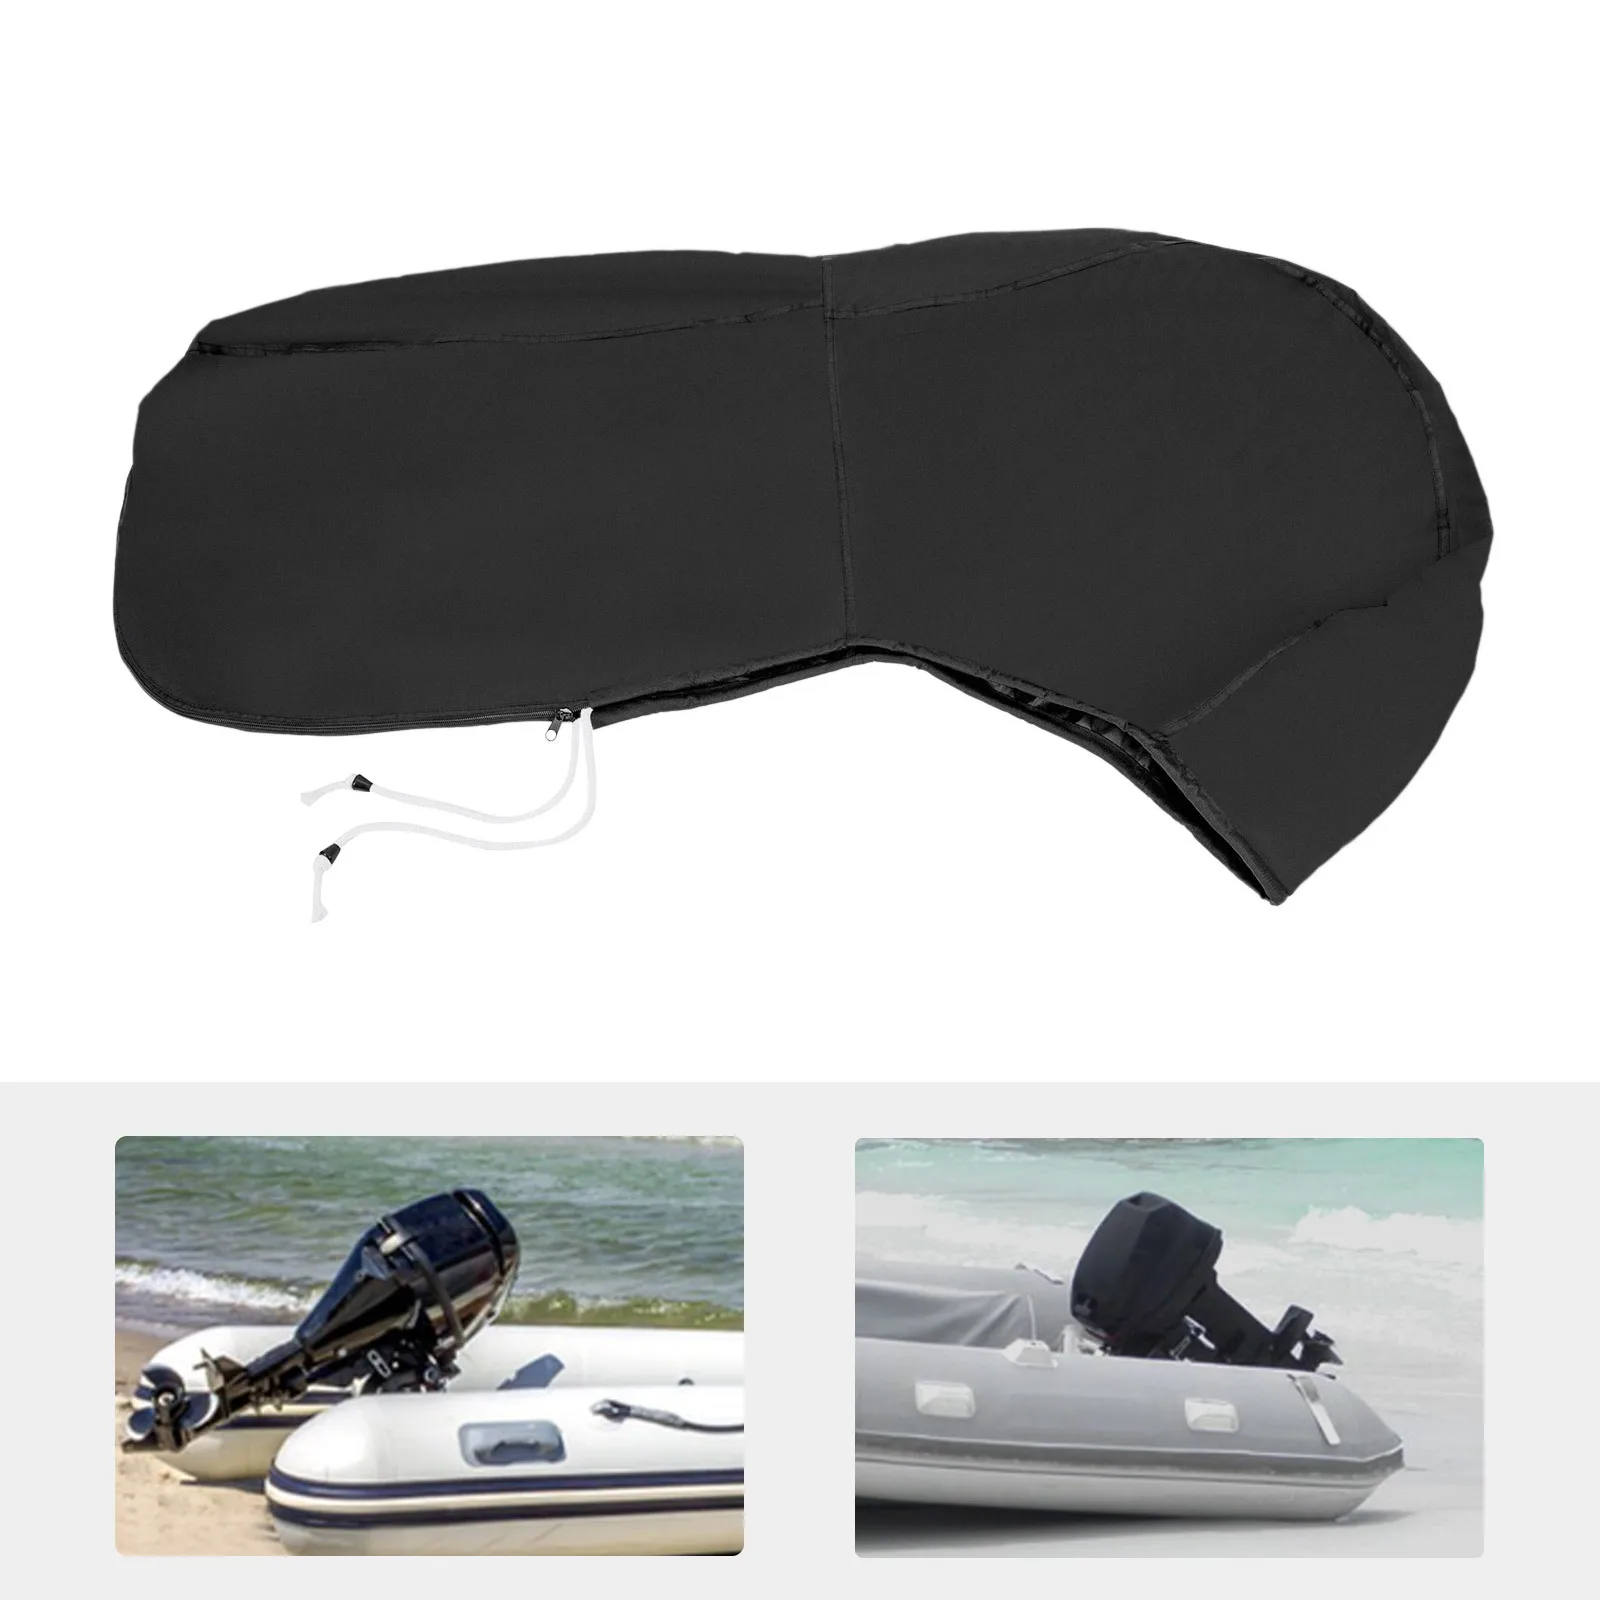 600D Oxford Cloth Waterproof Motor Full Outboard Boat Engine Cover with a Zippered Storage Bagfor 6-15HP Black Heat-resistant 600d oxford cloth waterproof motor full outboard boat engine cover with a zippered storage bagfor 6 15hp black heat resistant